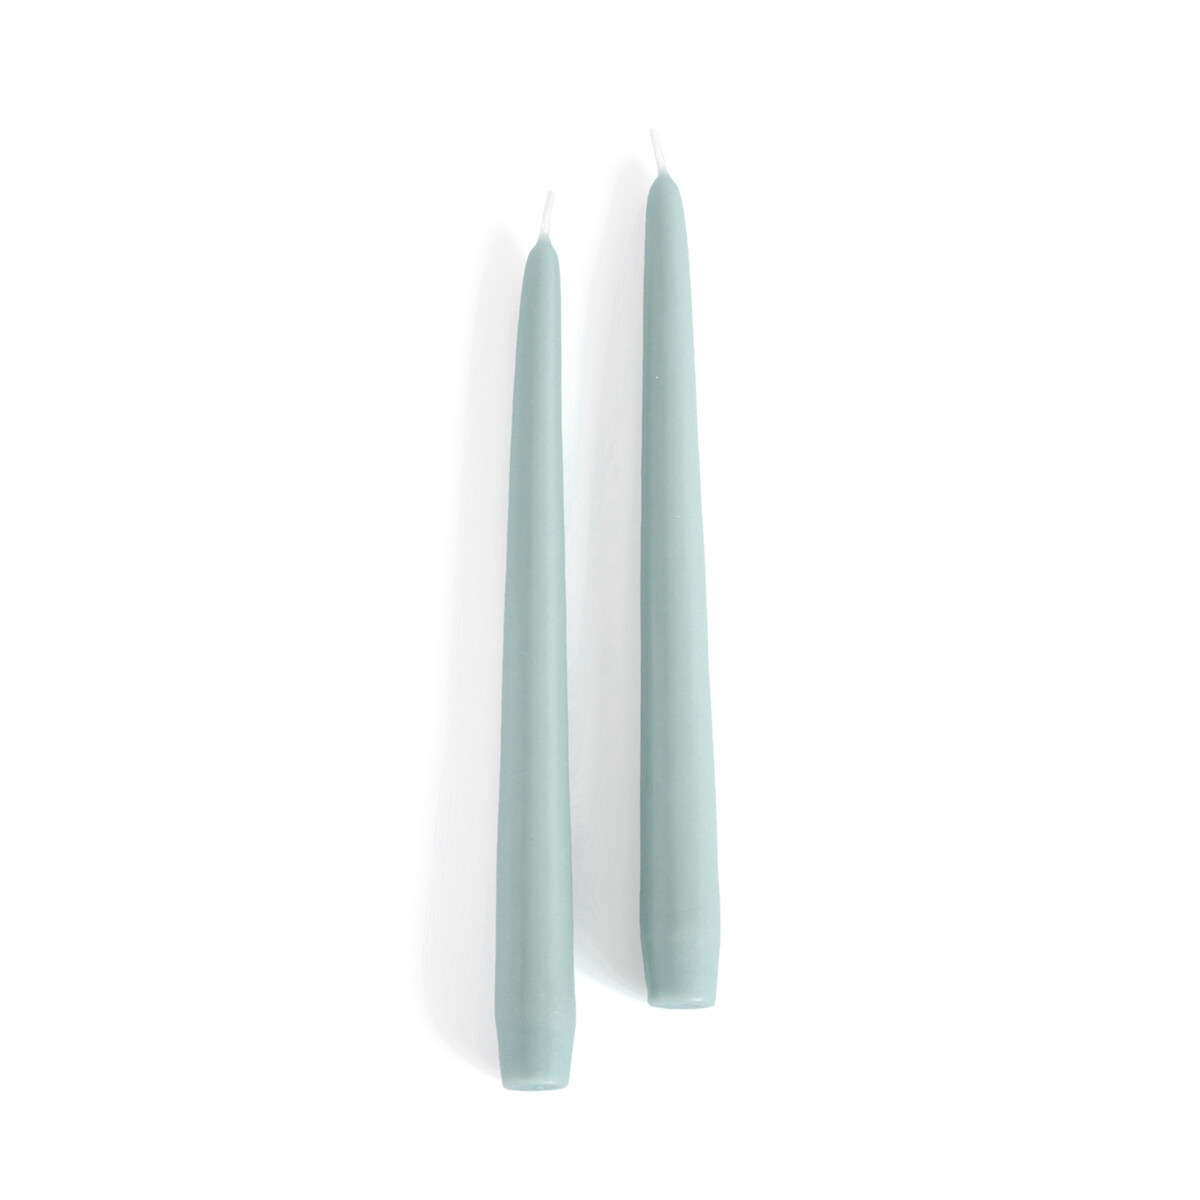 Set of 2 Fabola Smooth Dinner Candles - image 1